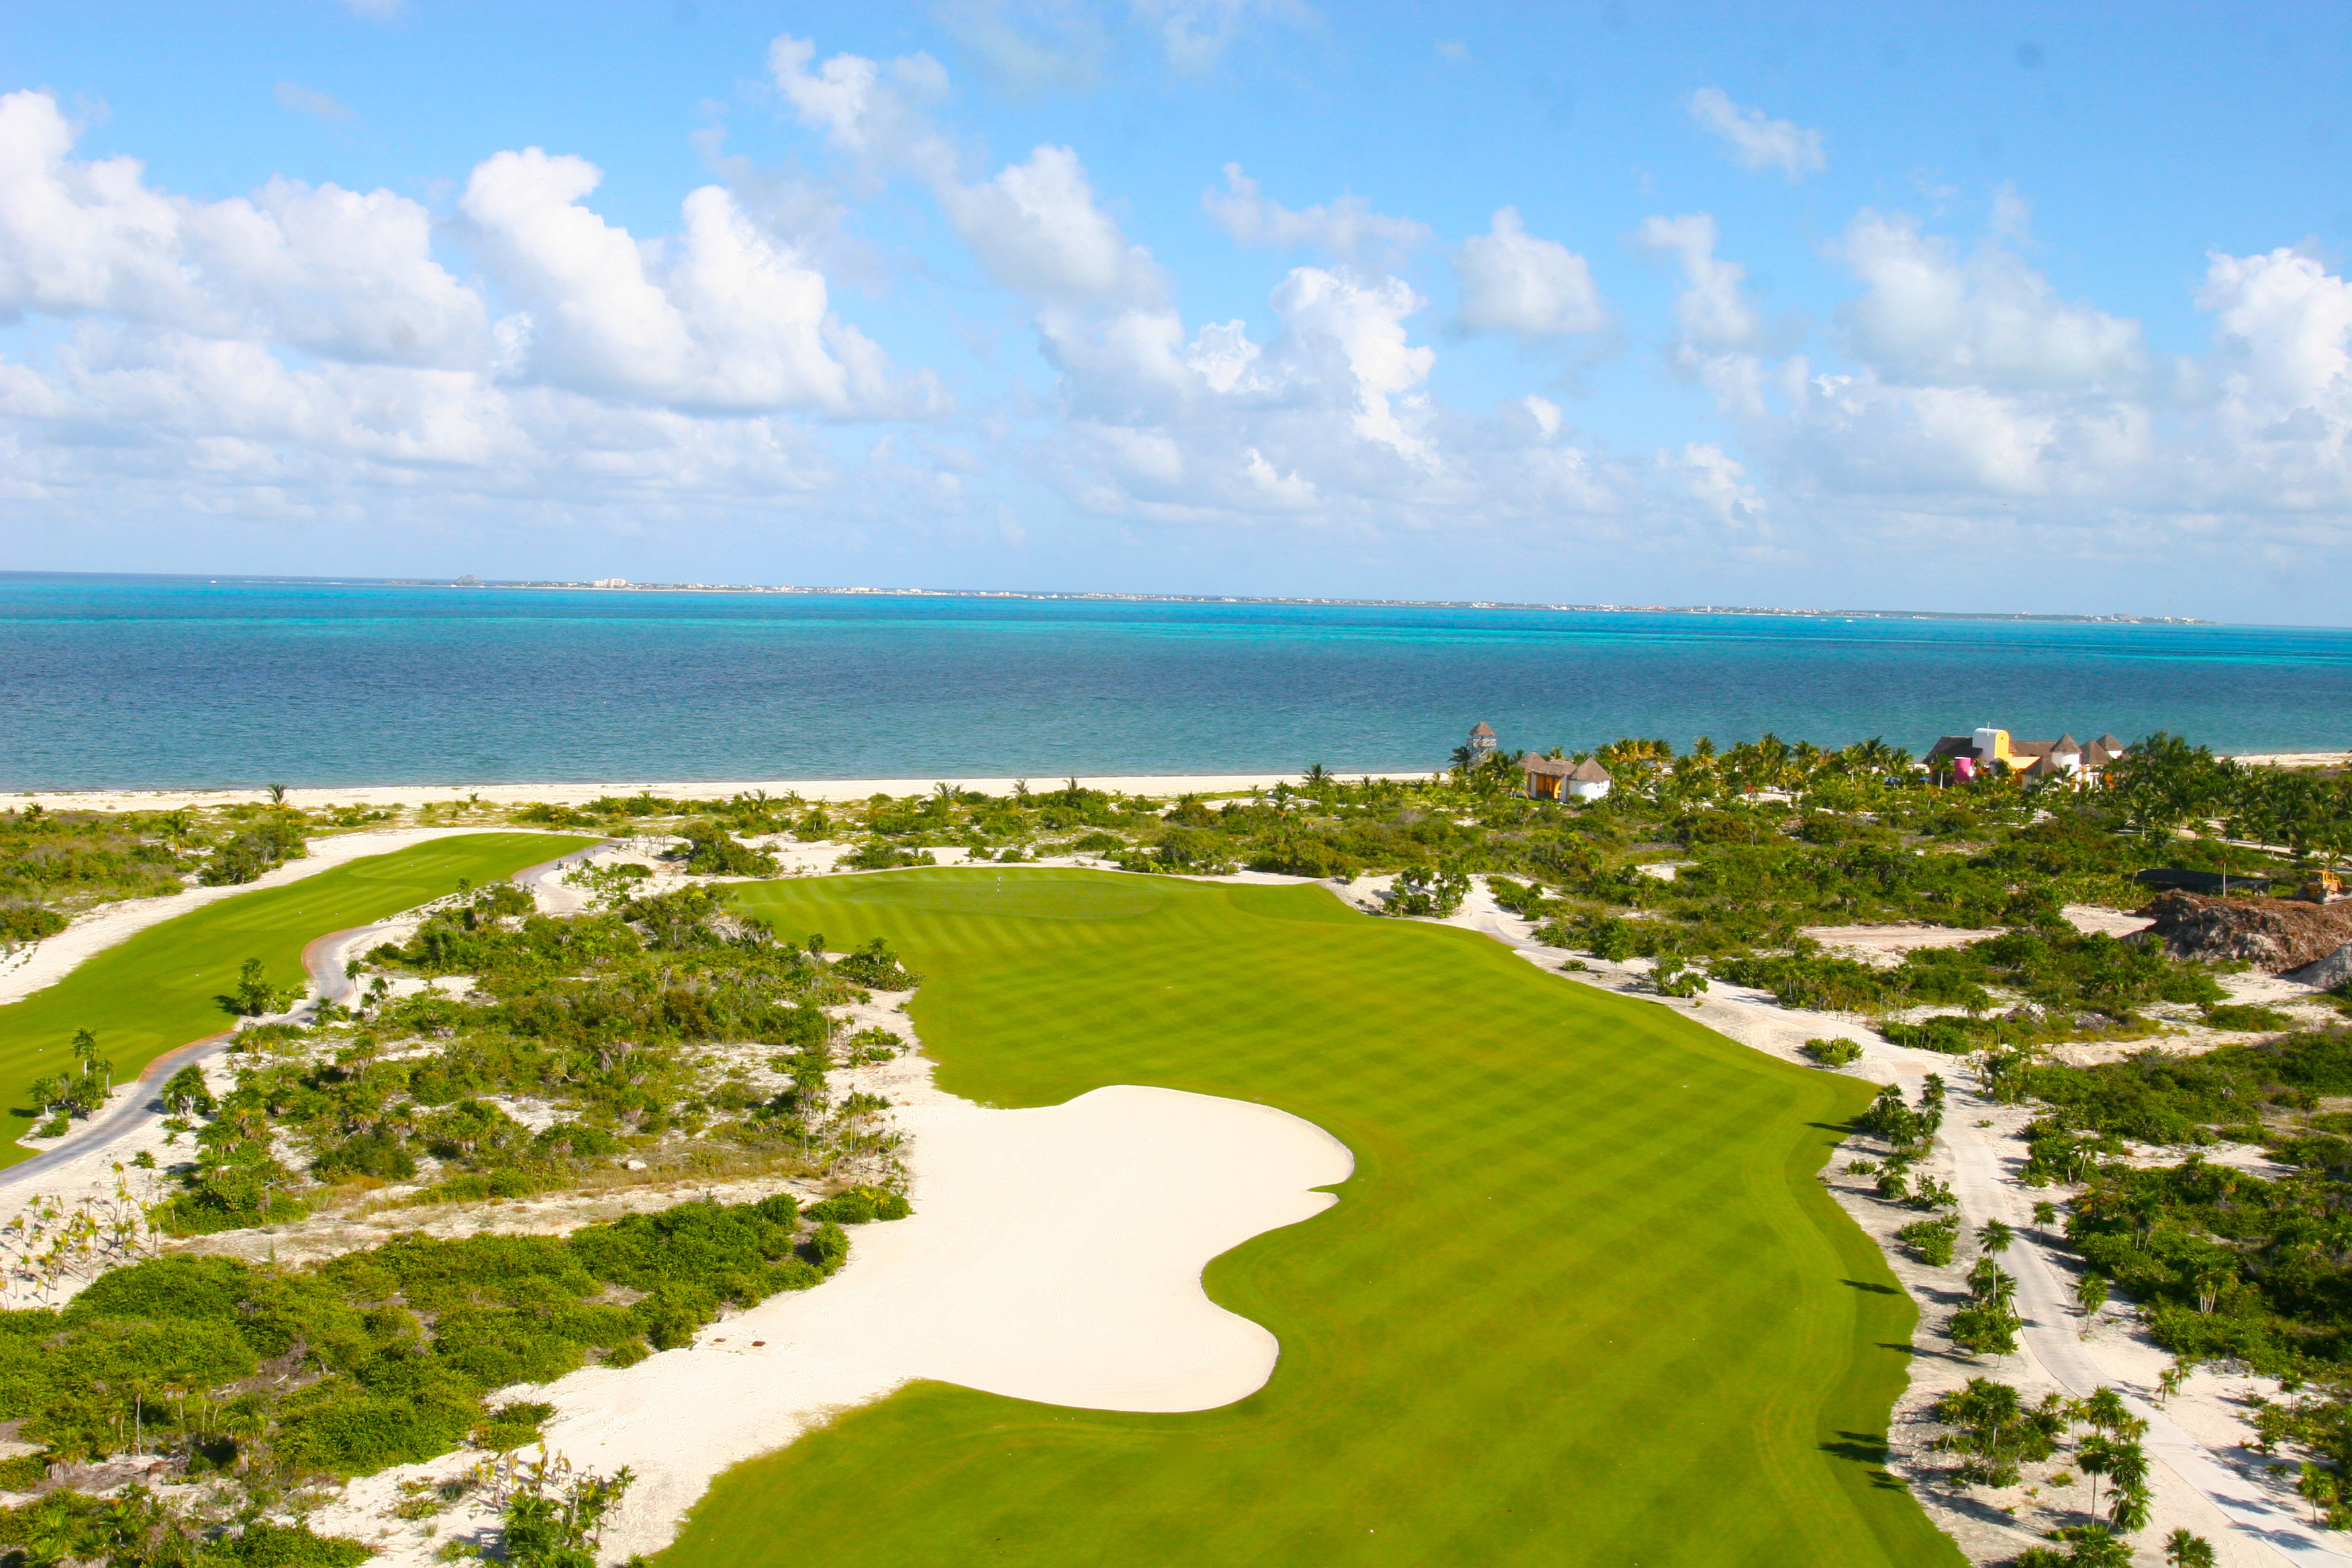 Golf course in Playa Mujeres designed by Greg Norman